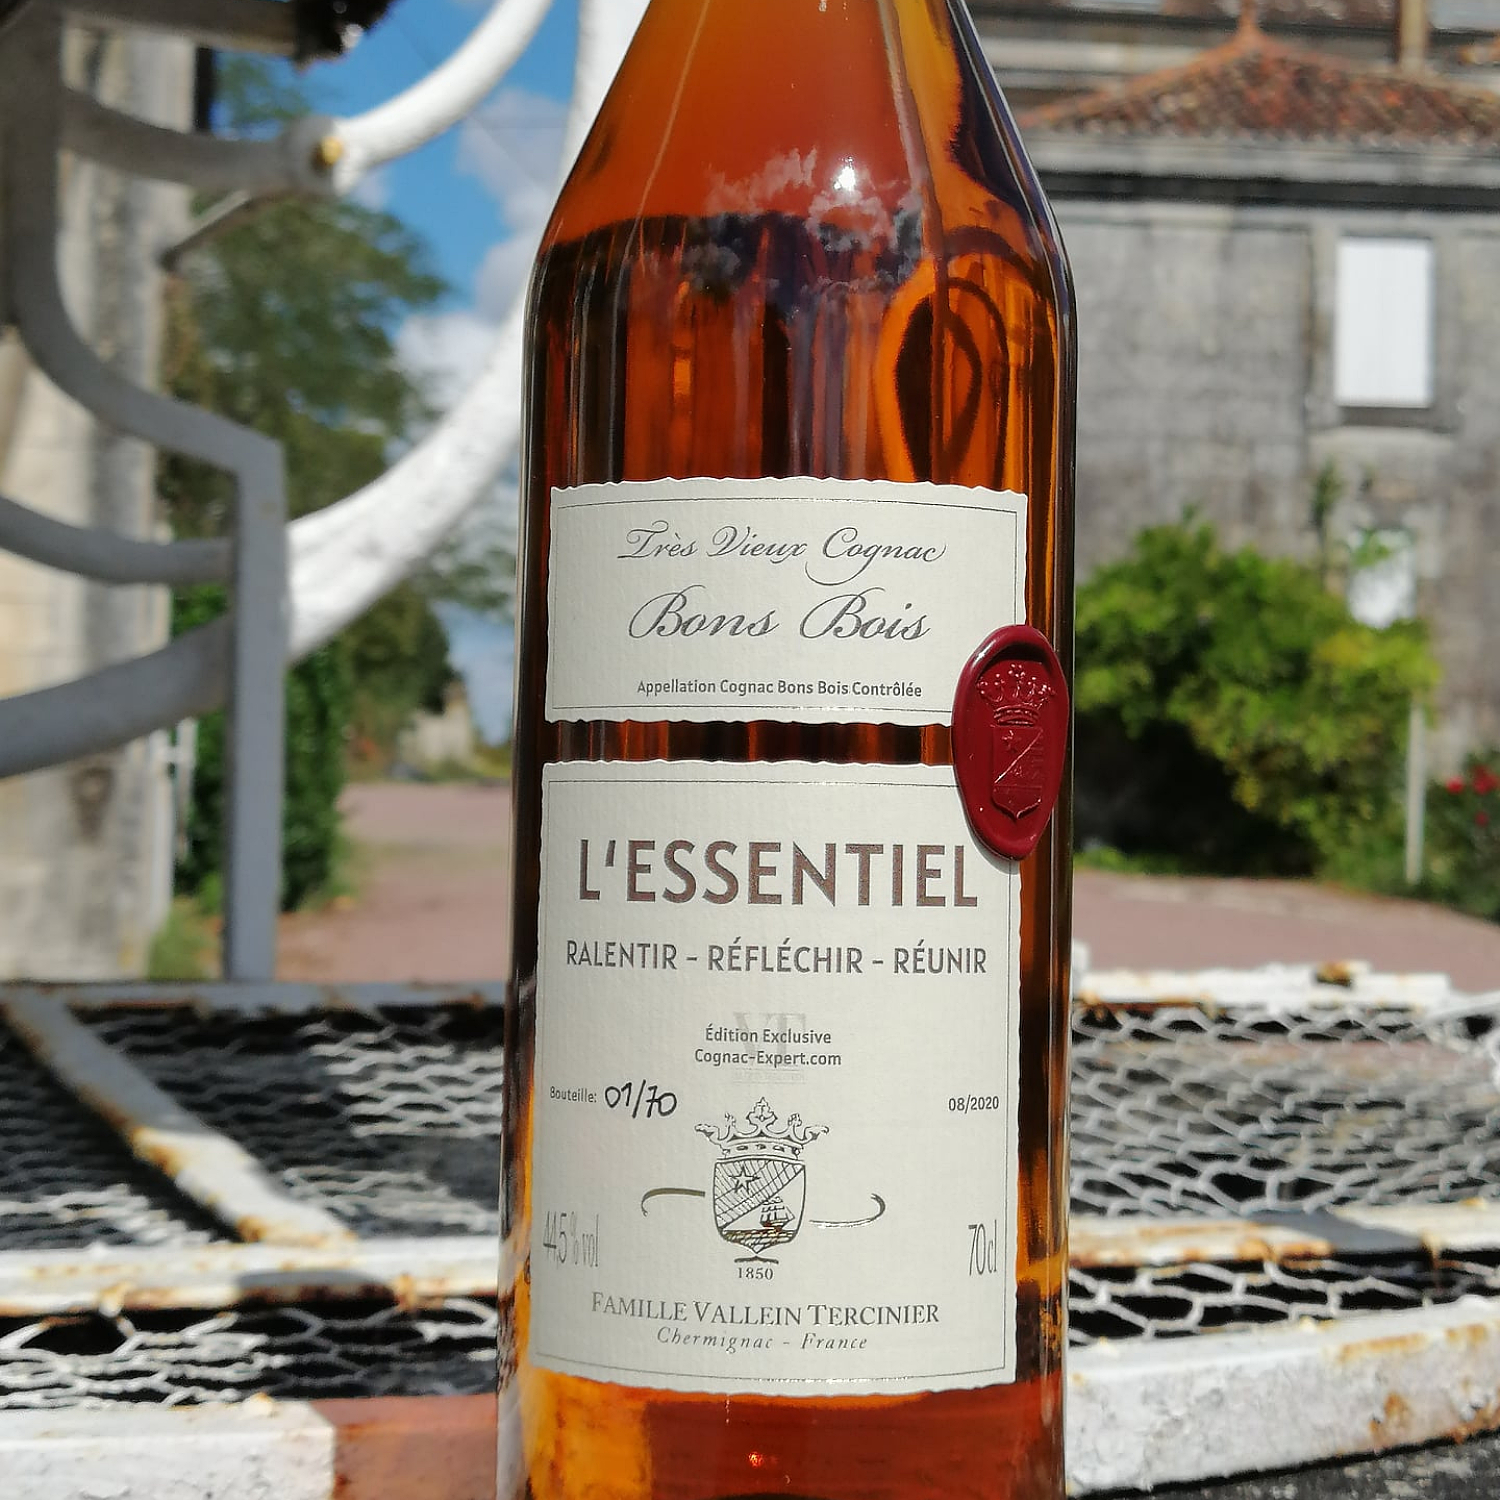 Bottle of L'Essentiel with the chateau in the background